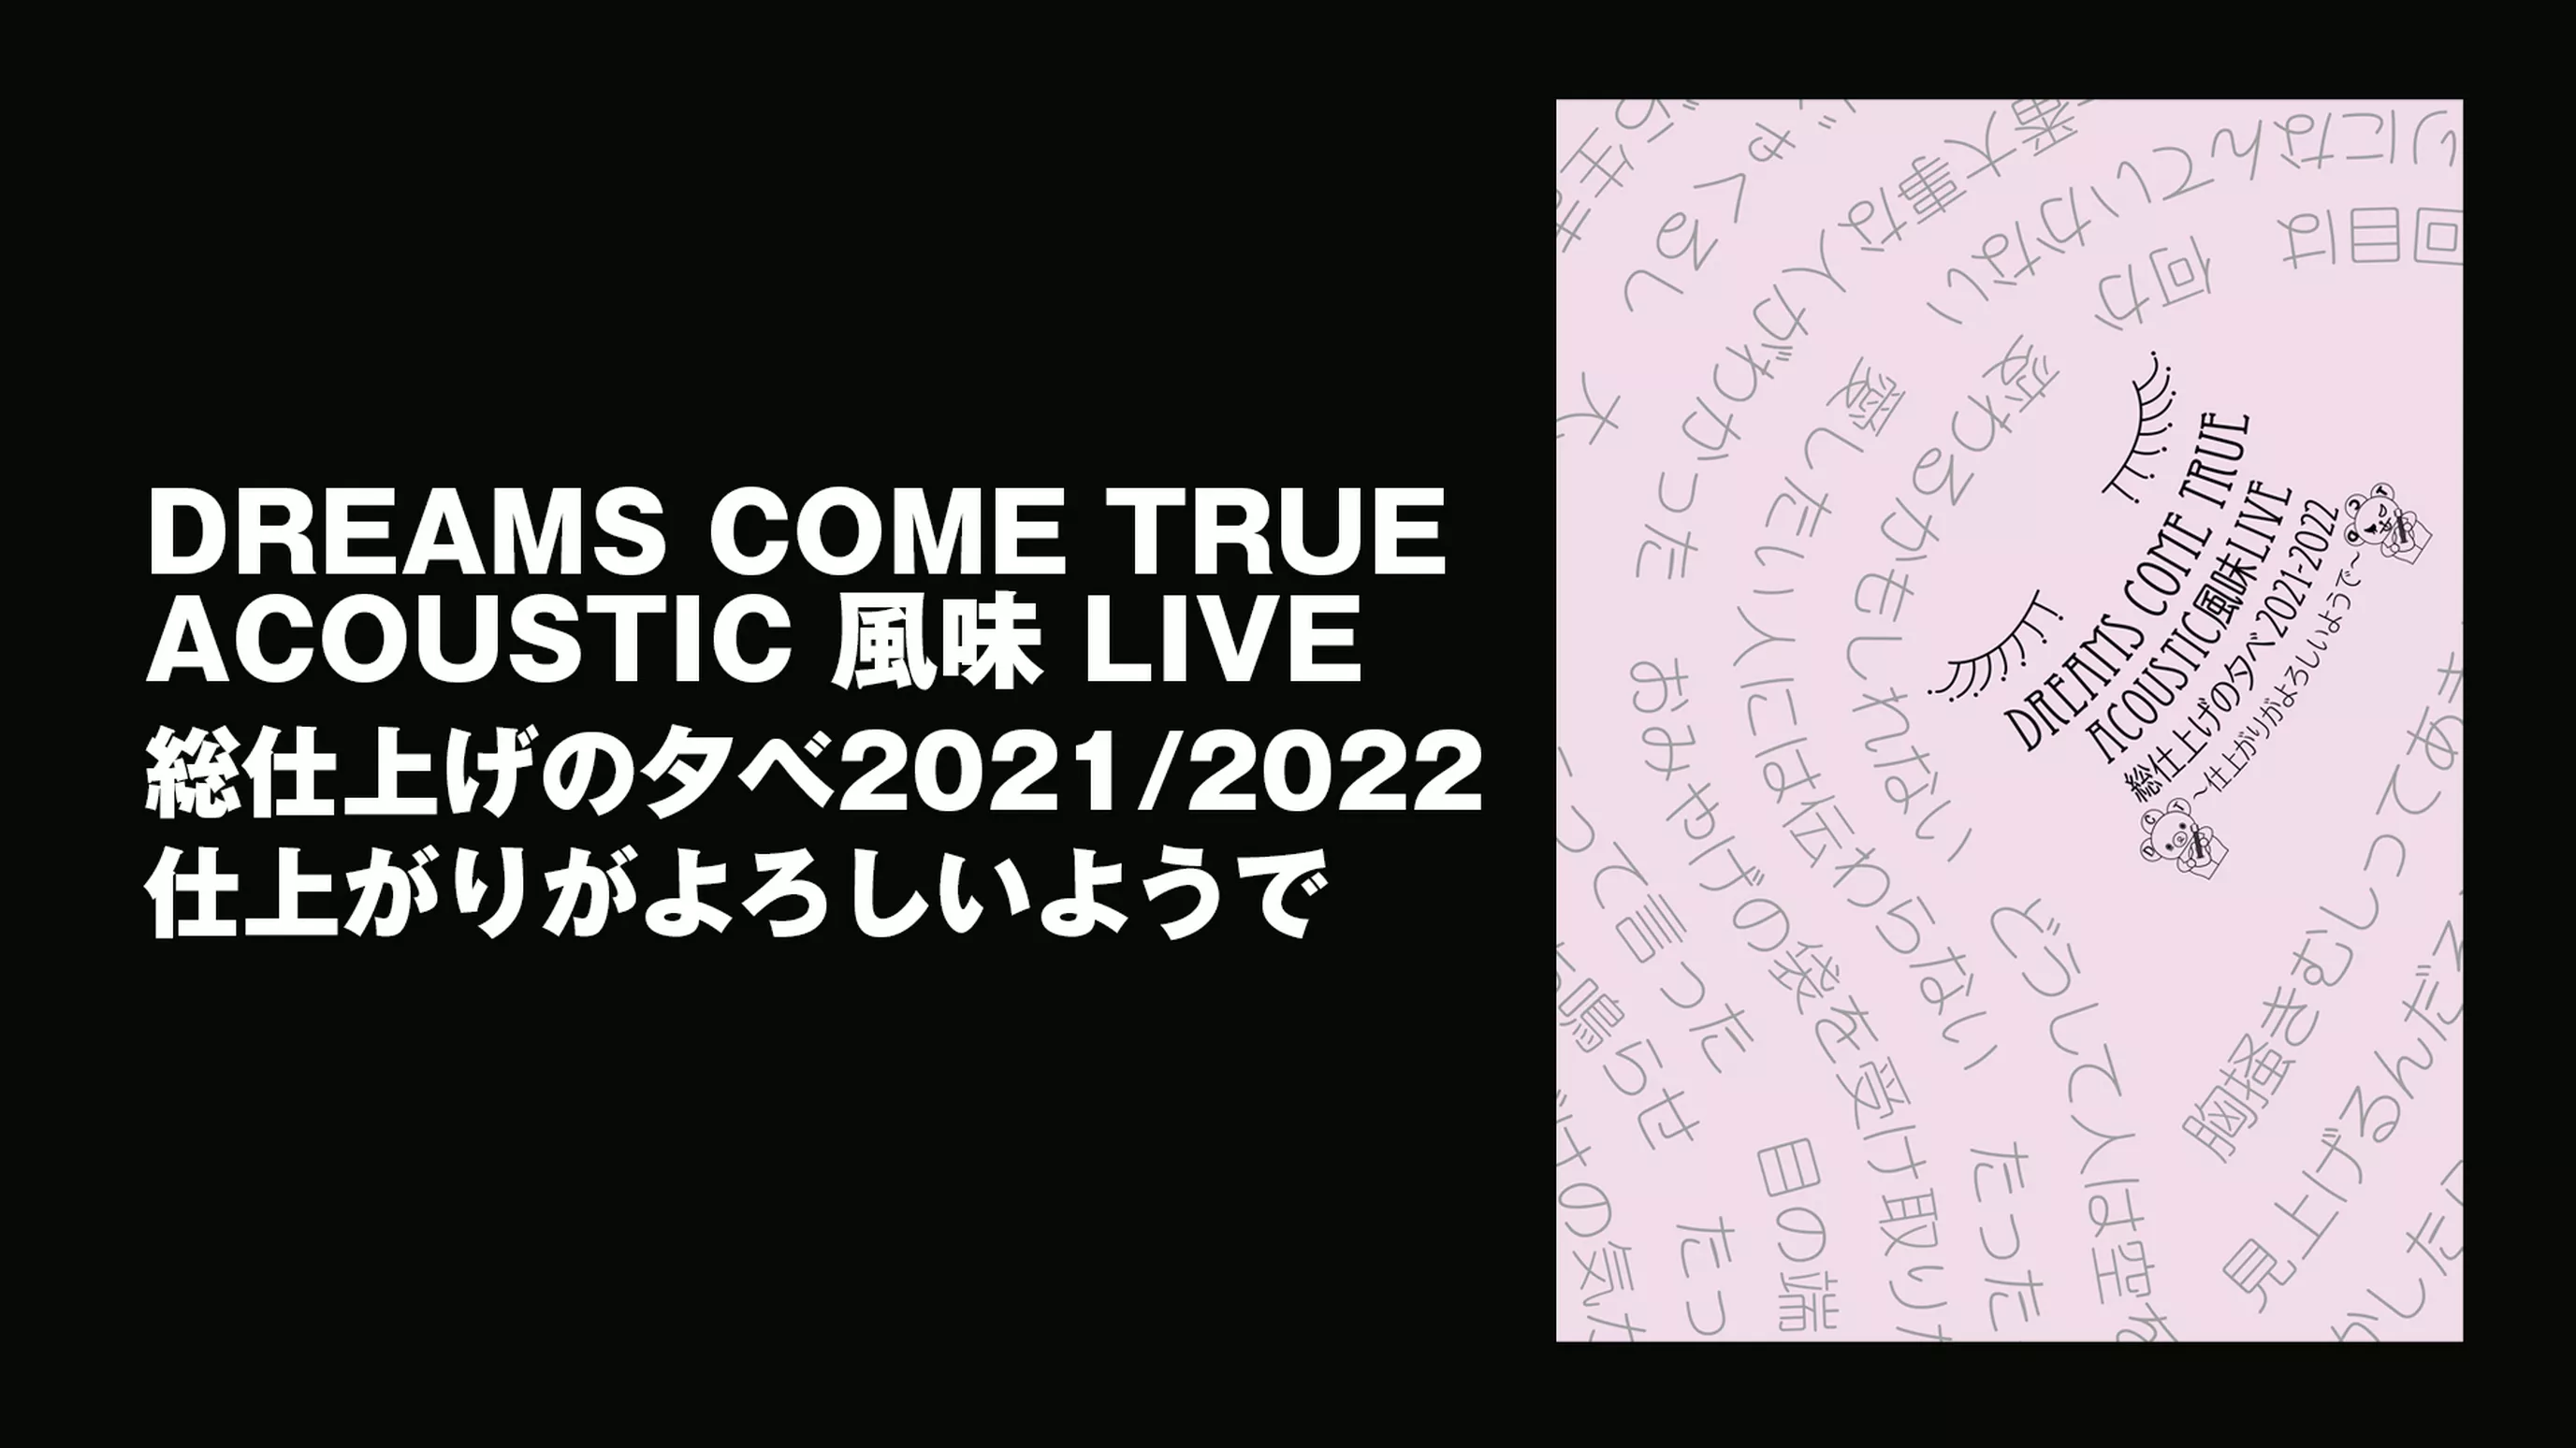 DREAMS COME TRUE ACOUSTIC 風味LIVE 総仕上げの夕べ 2021/2022 〜仕上がりがよろしいようで〜